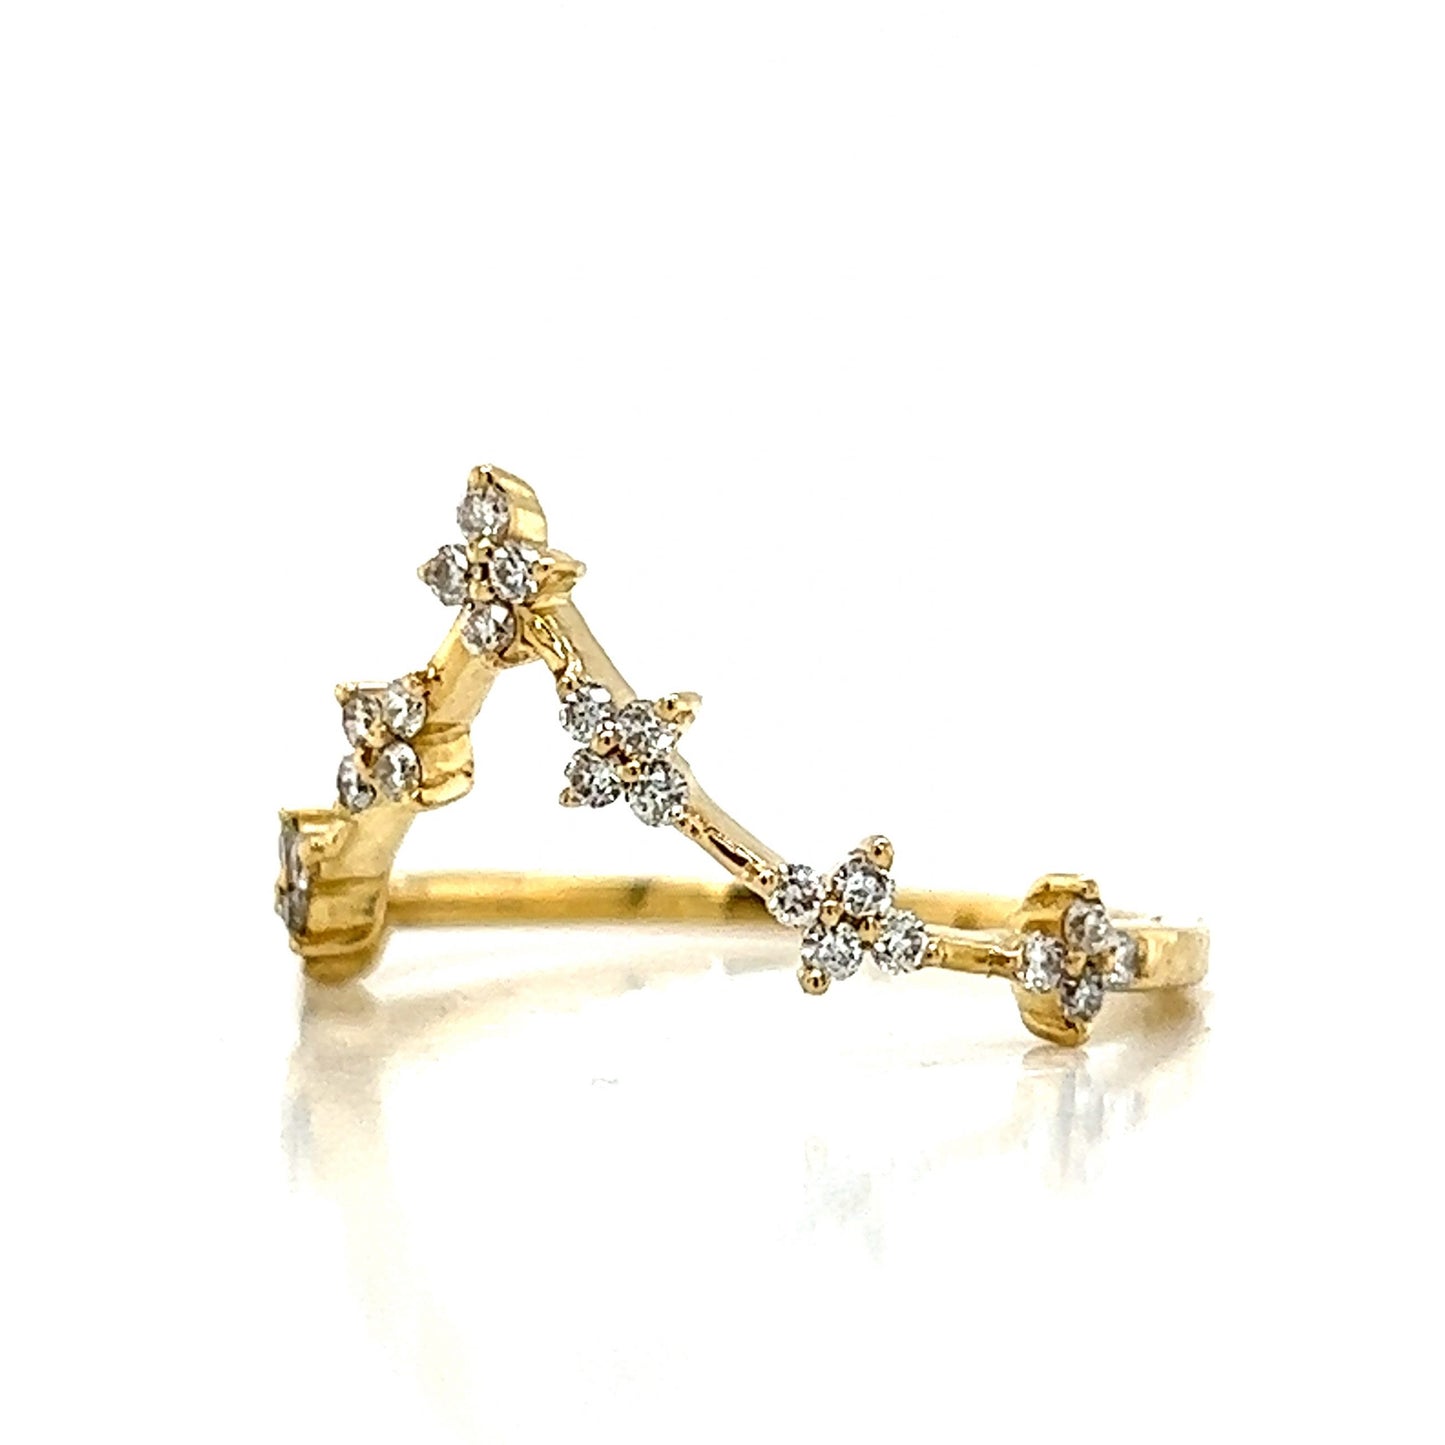 Contoured Cluster Diamond Wedding Band in 14k Yellow Gold